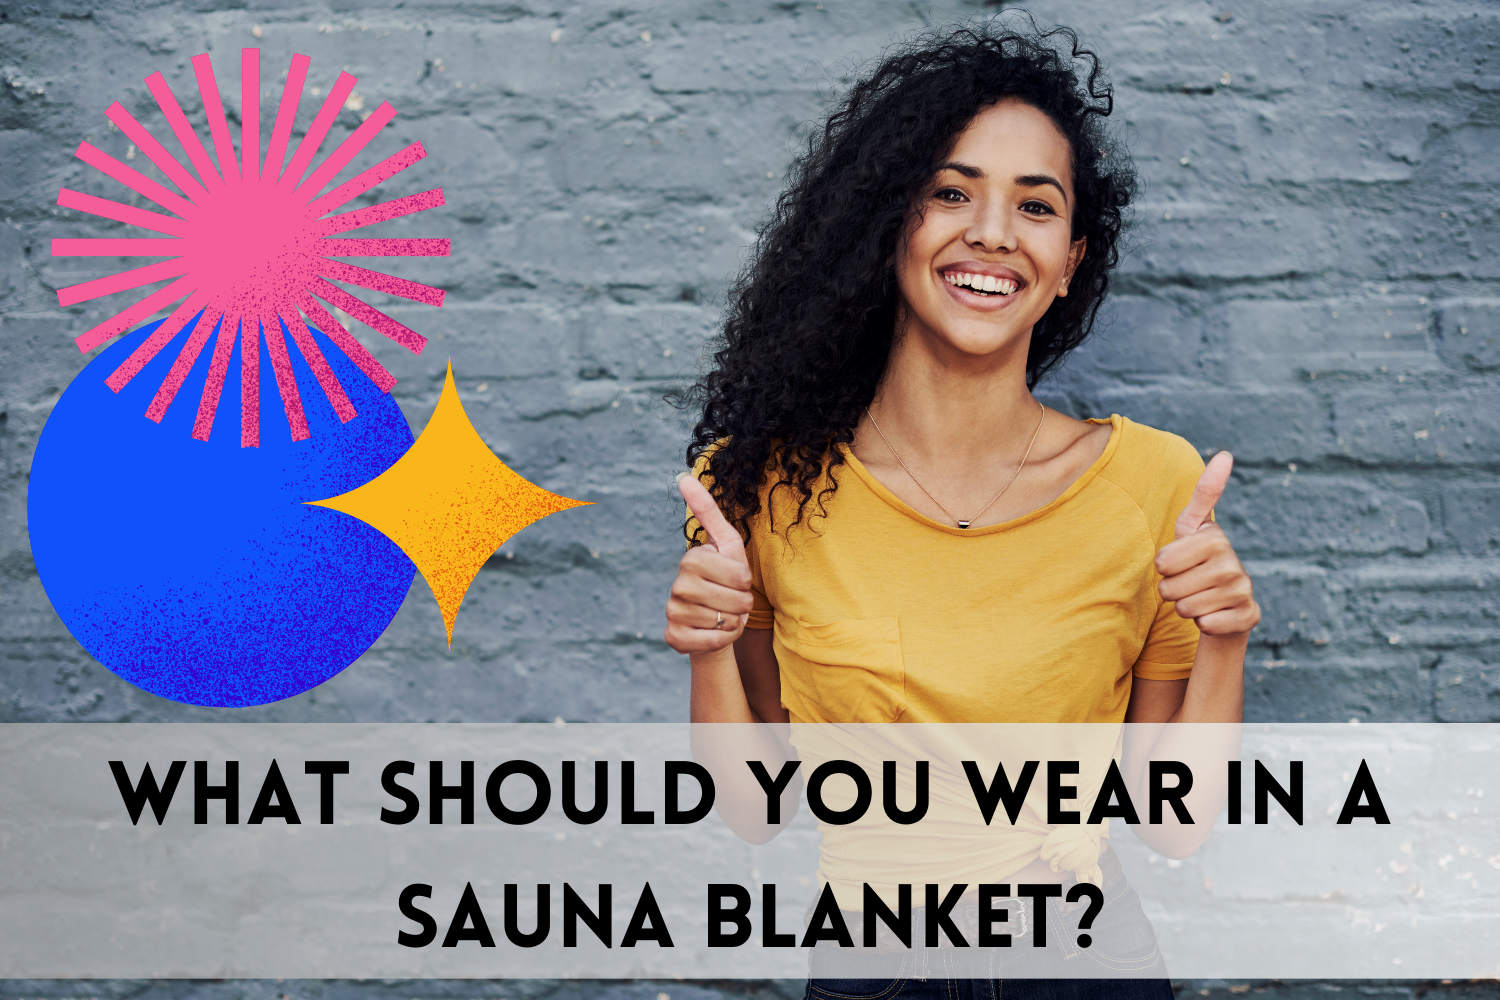 what clothes should you wear in a sauna blanket?